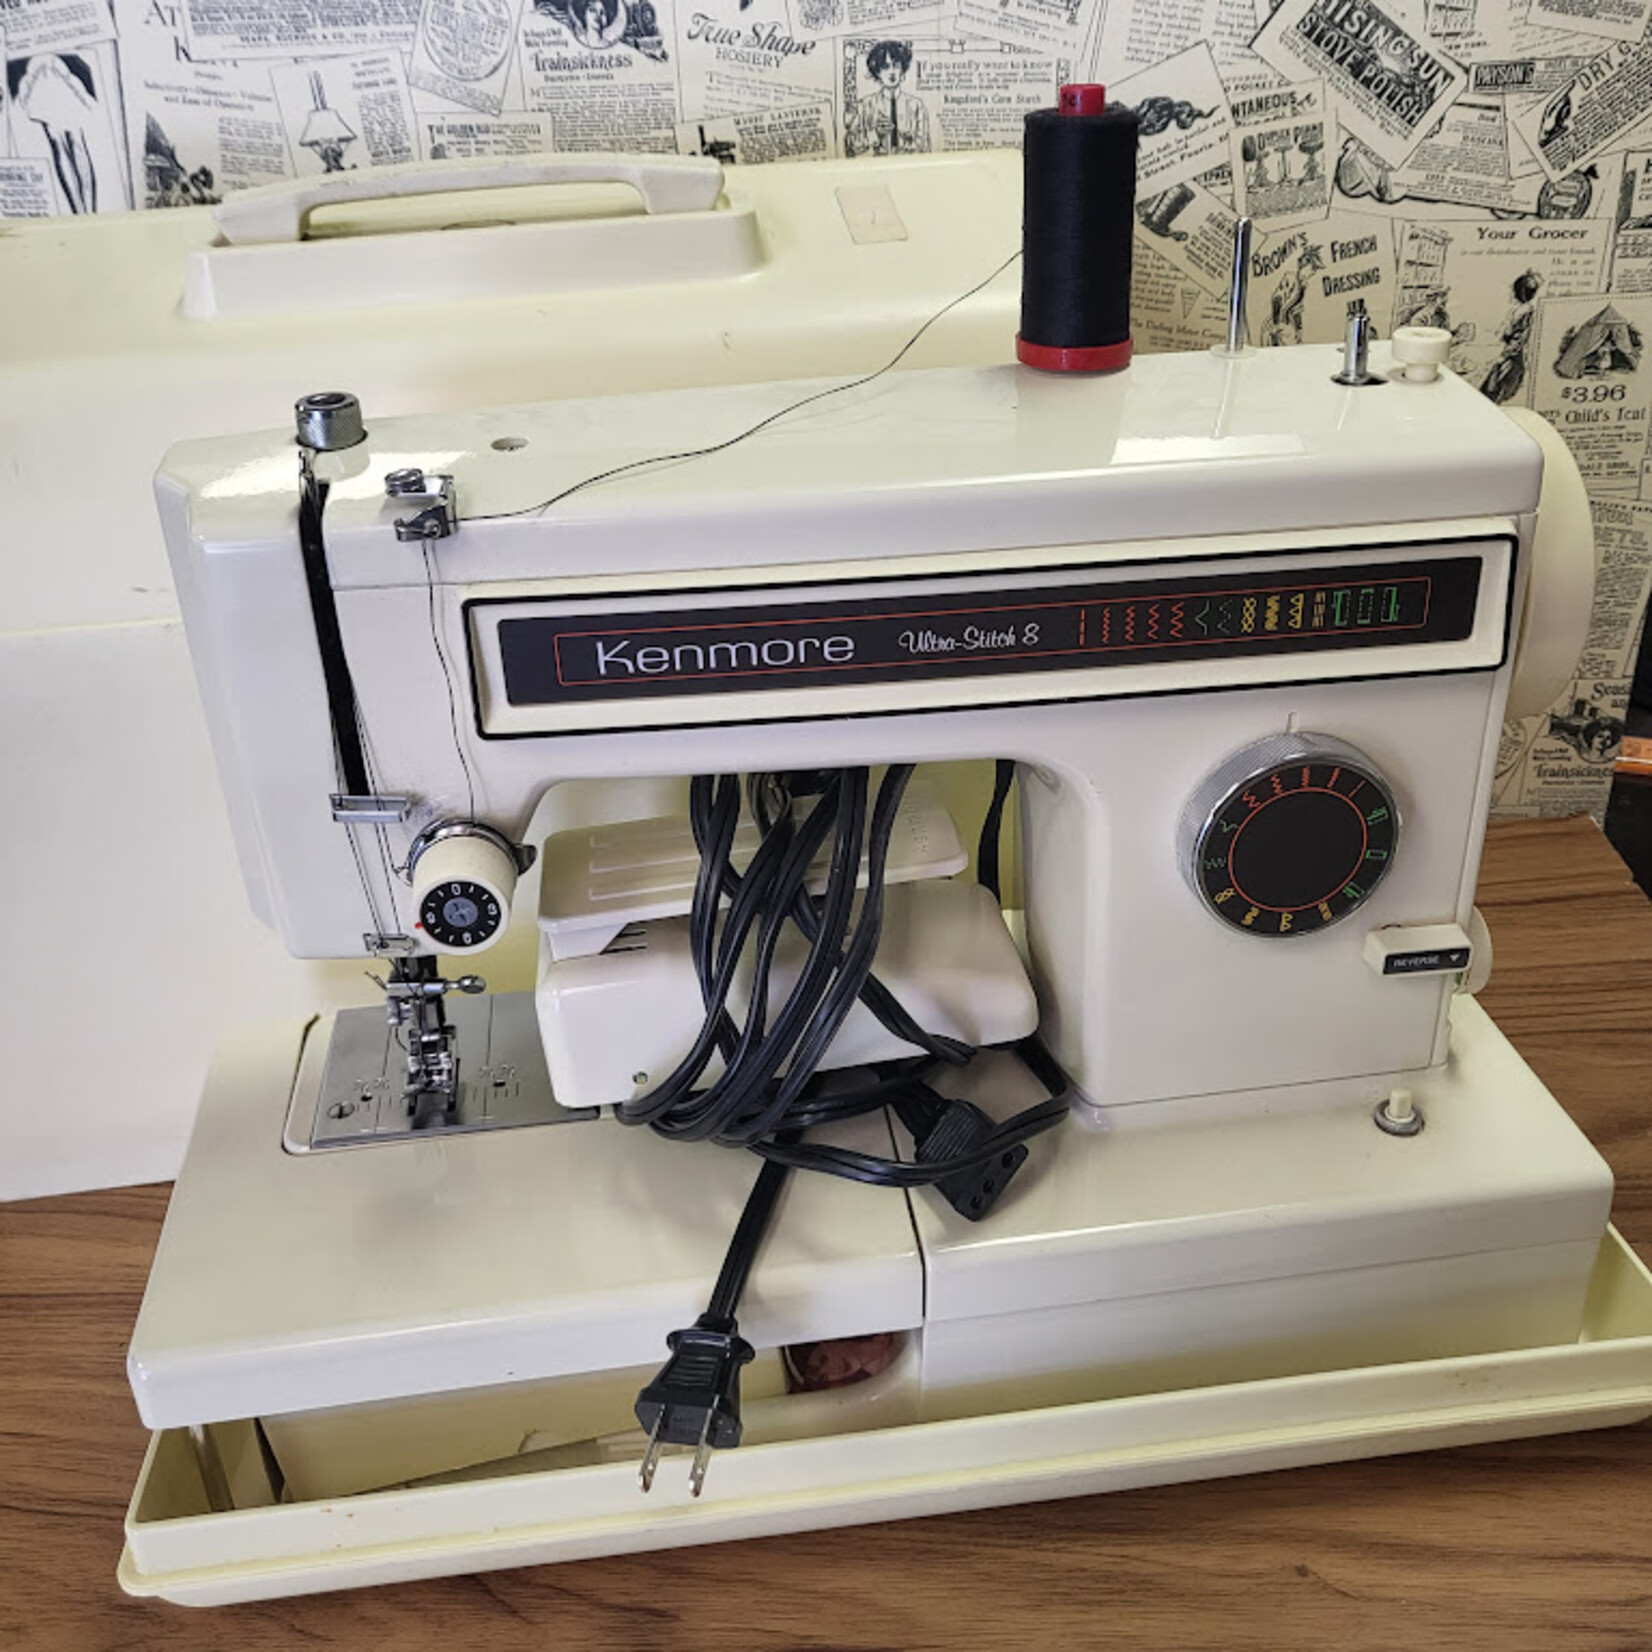 Kenmore Ultra Stitch 8 Sewing Machine with Carry Case, 4 feet, Manual and Power - Pedal Cord